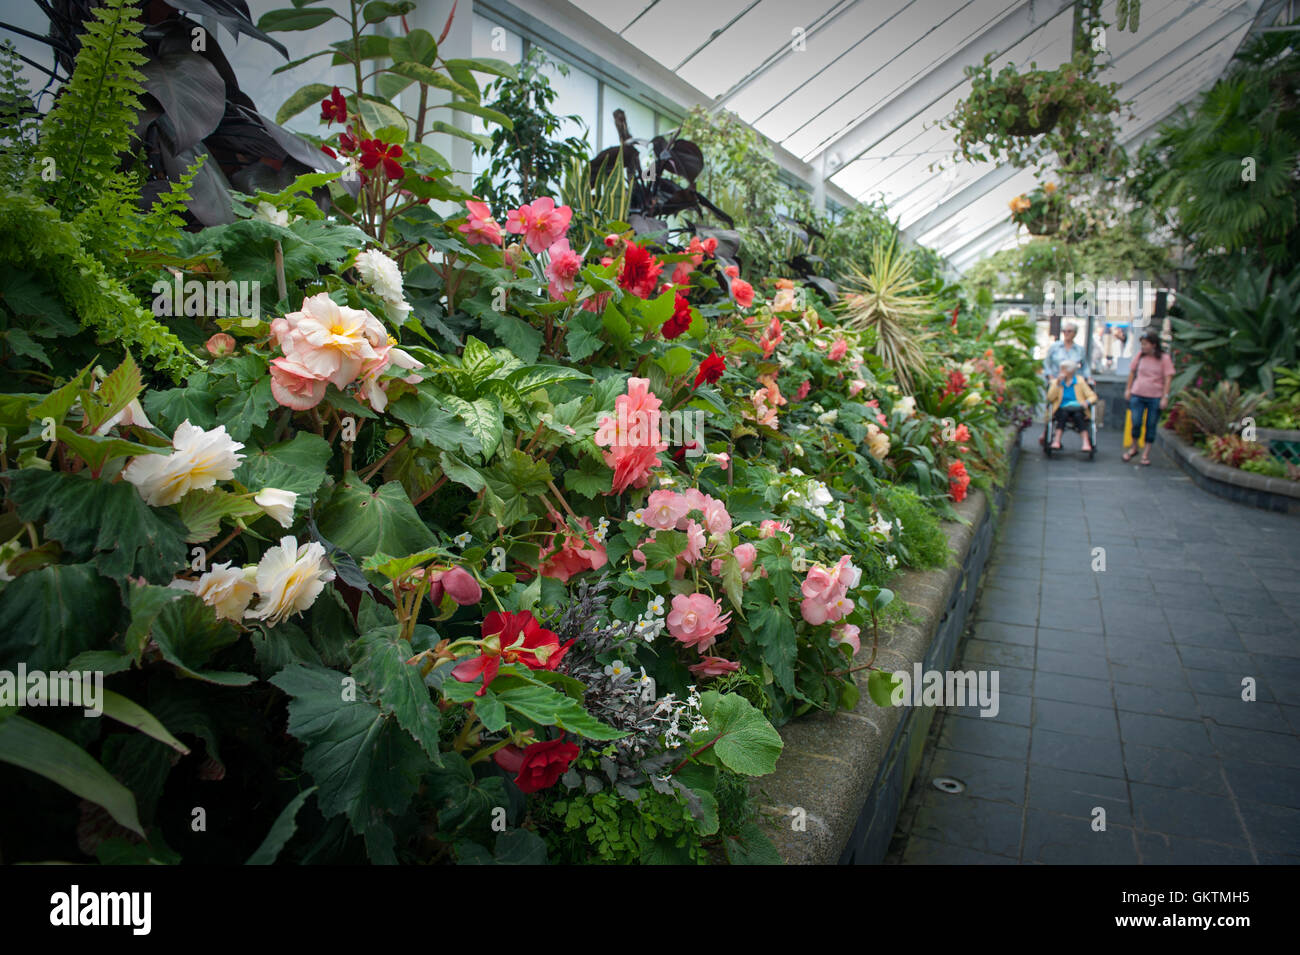 Wellington, New Zealand - March 2, 2016: Visitors inspecting Begonia plants grown at Begonia House in Wellington, New Zealand Stock Photo